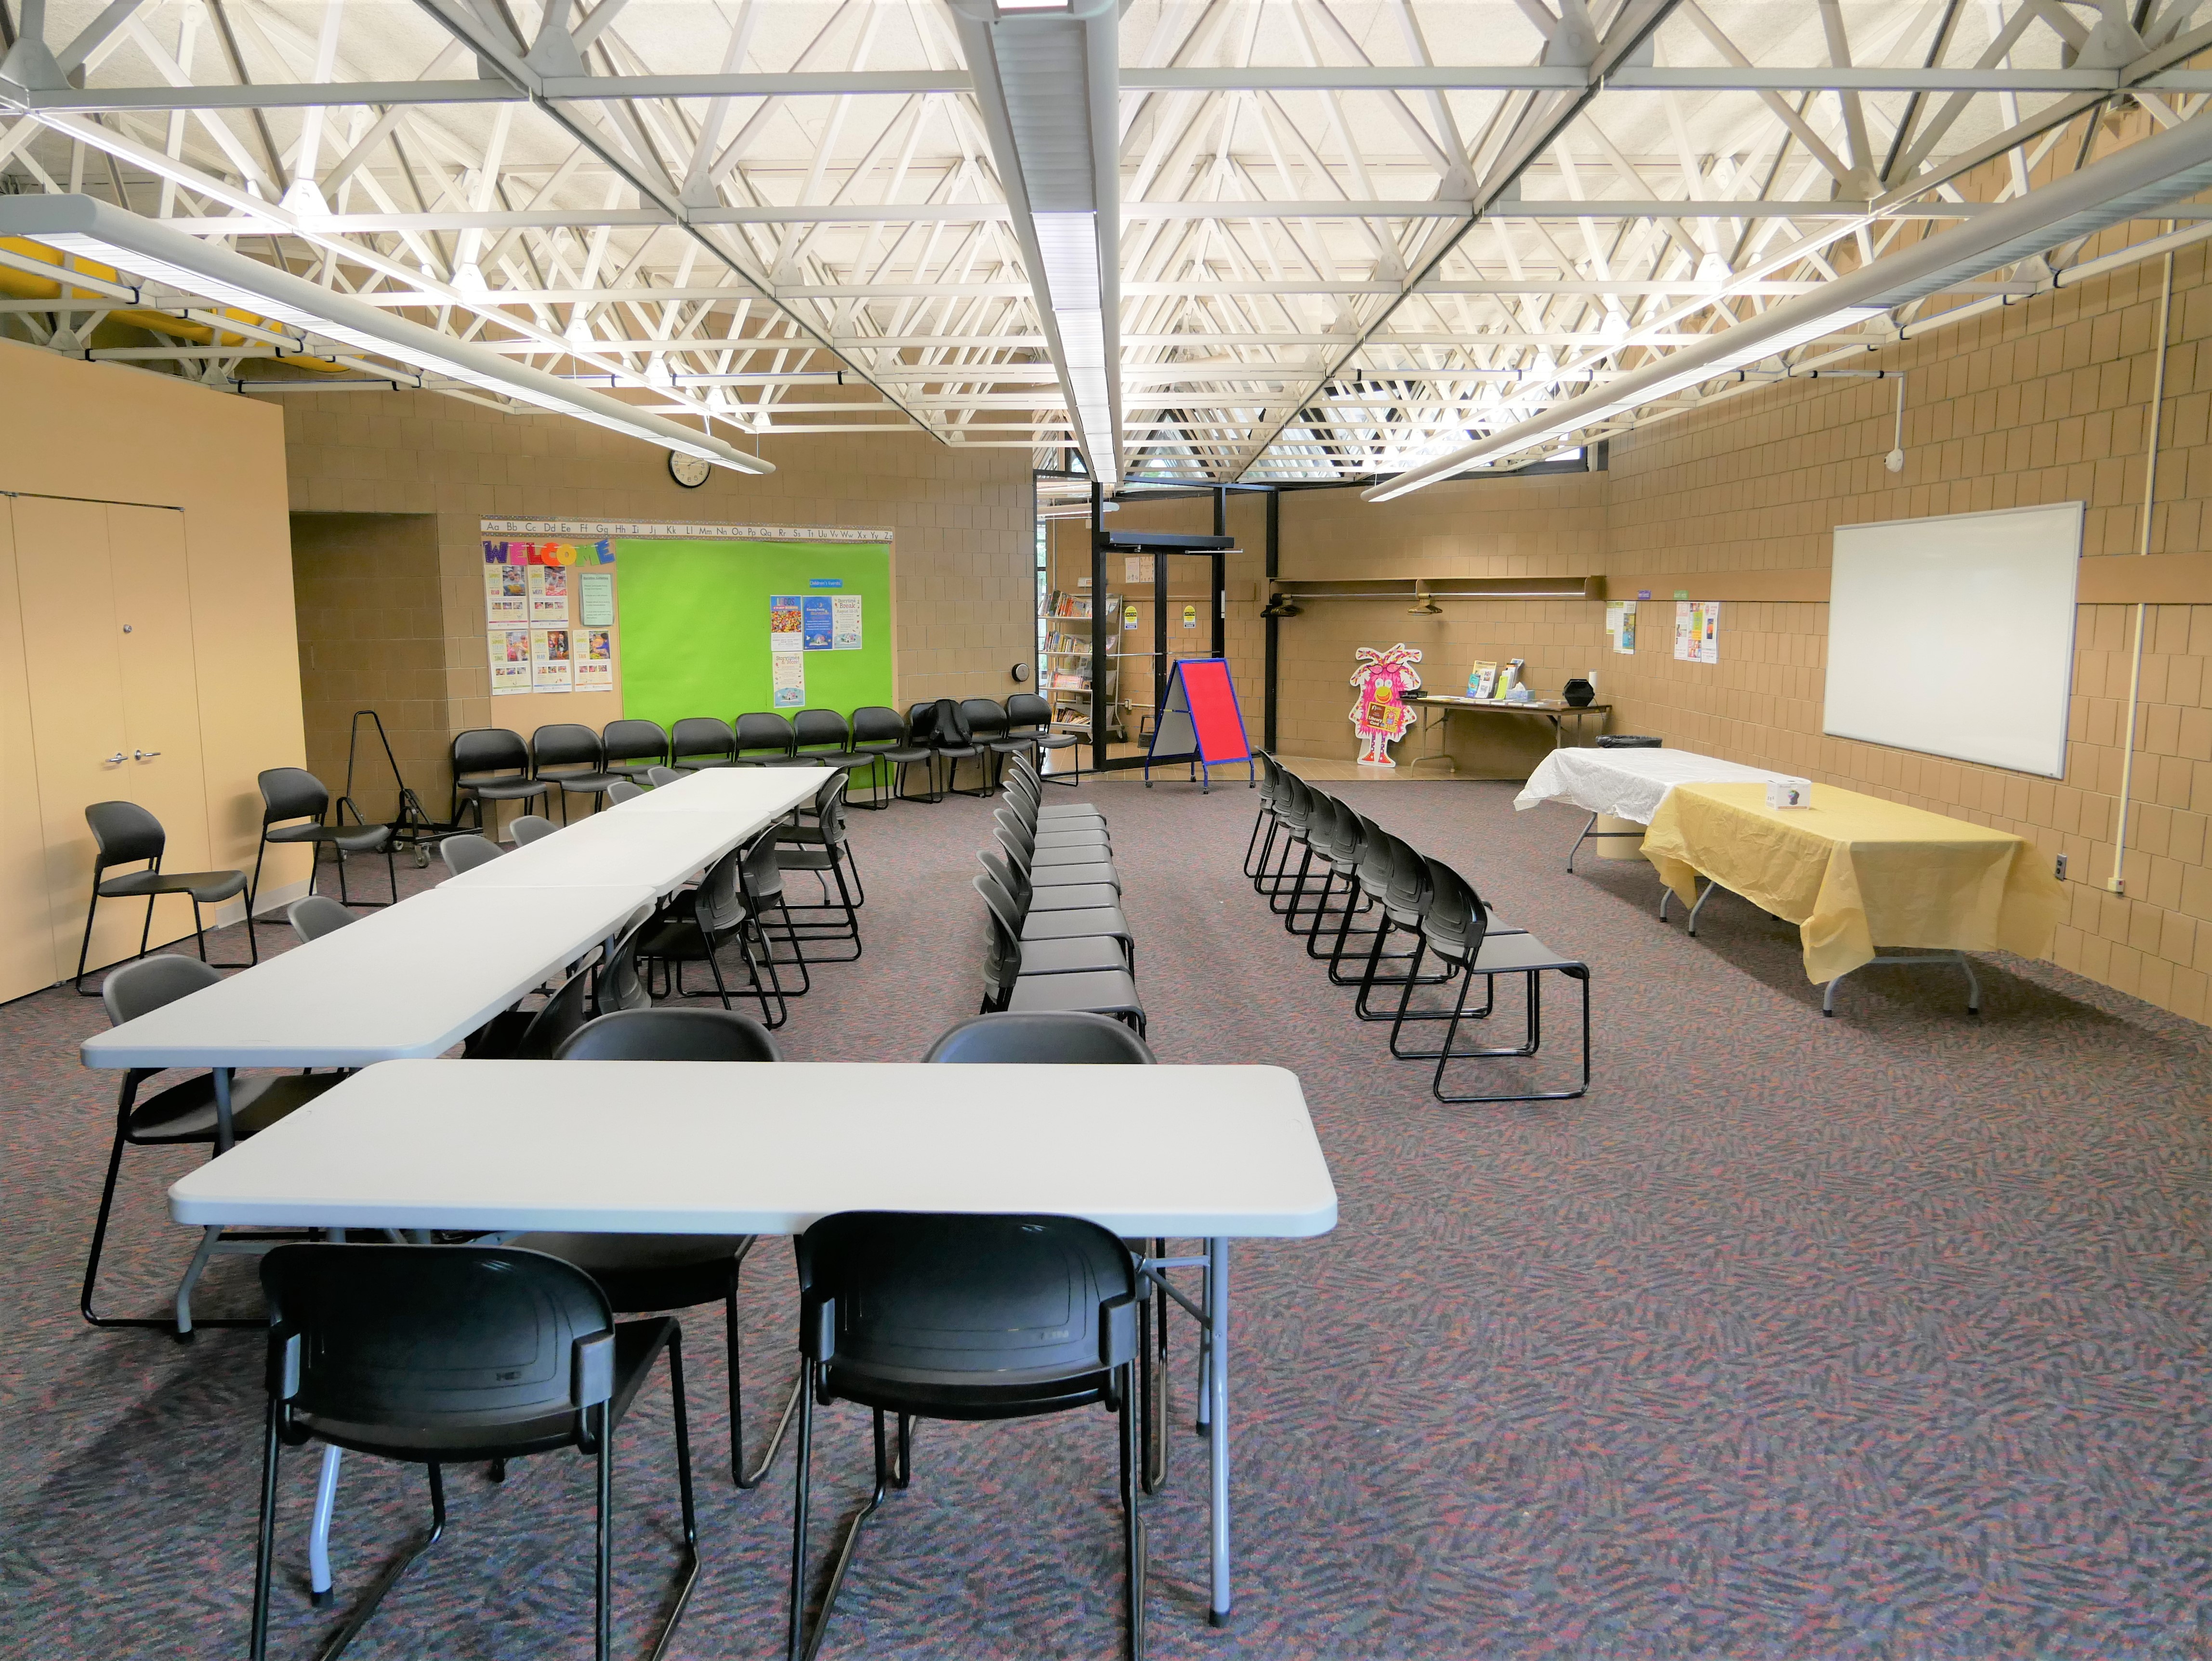 South Side Library Meeting Room with tables arranged in an L-shape, free standing chairs spread out in rows, and a whiteboard at the front of the room